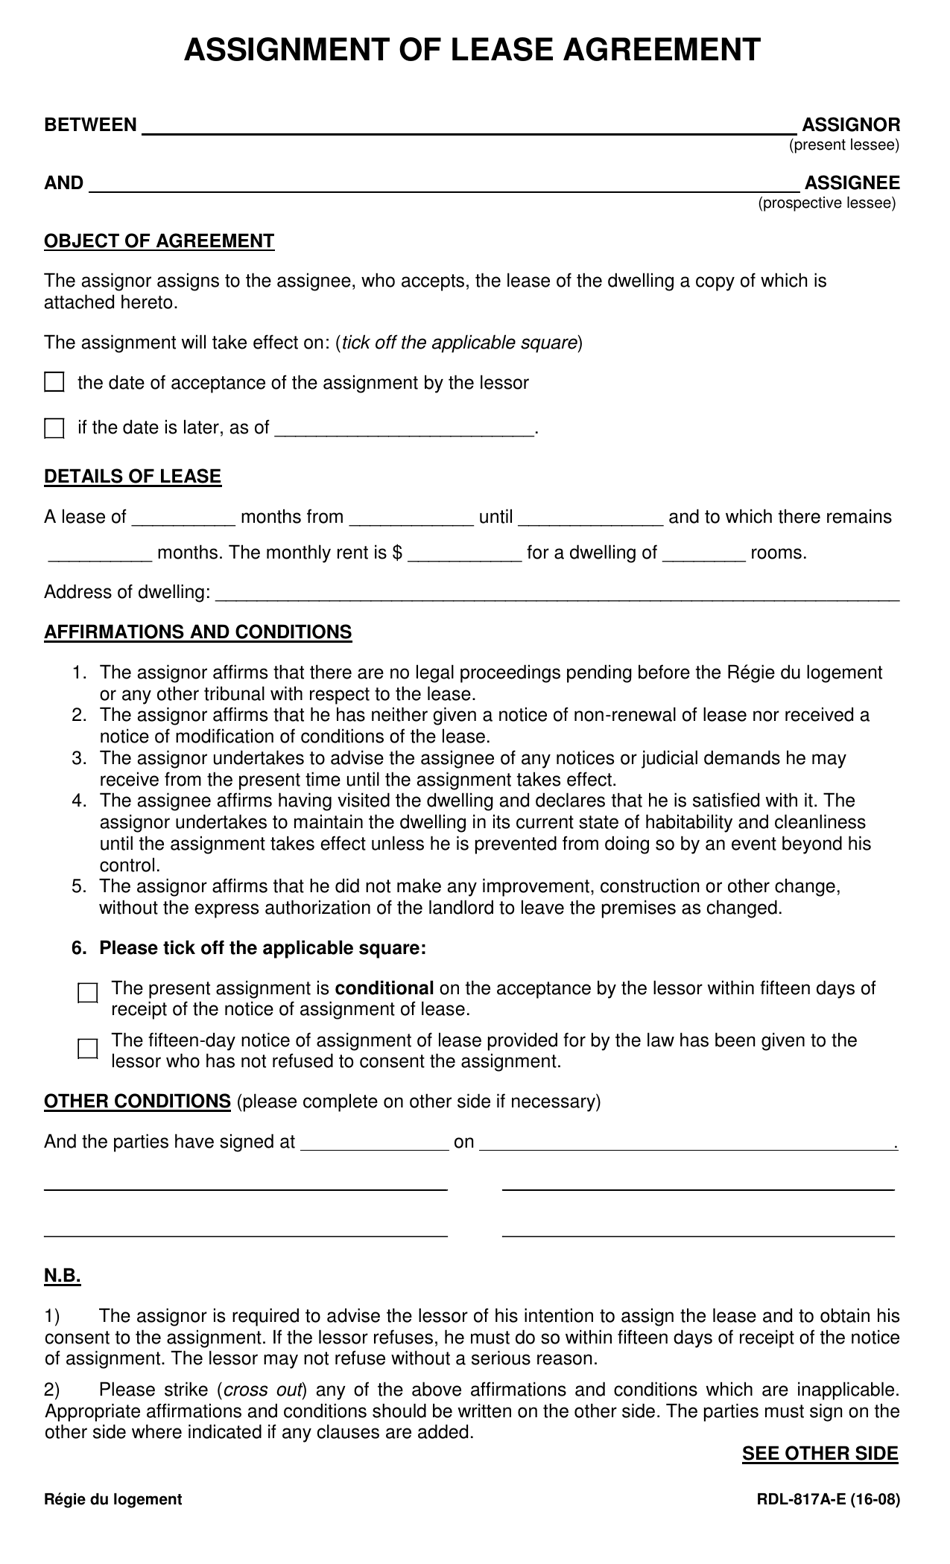 Form RDL-817A-E Assignment of Lease Agreement - Quebec, Canada, Page 1